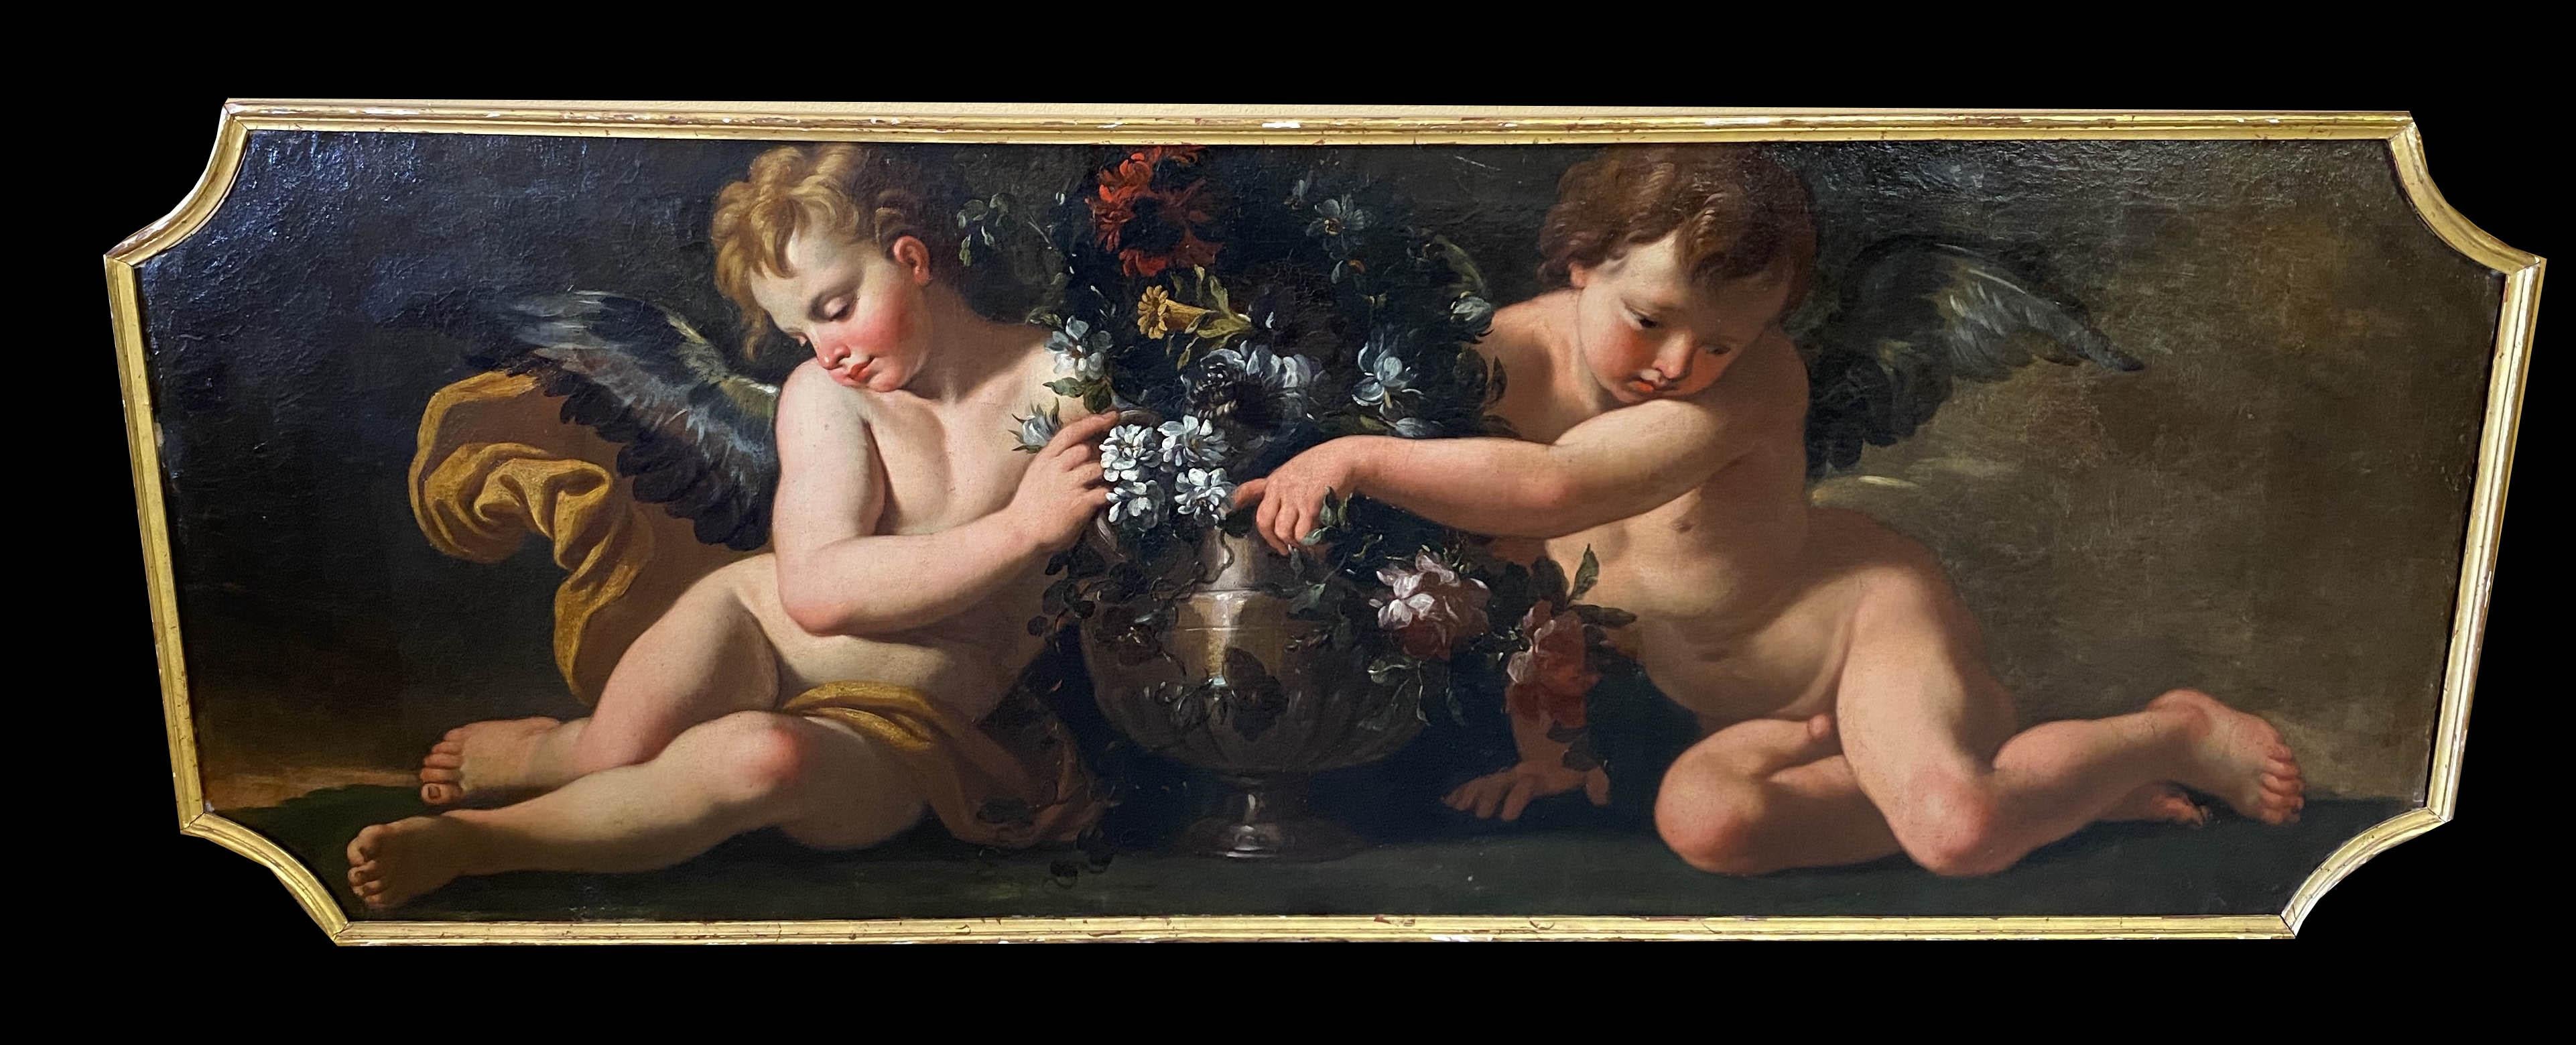 Important pair of still life with flowers in a vase and delicious Putti . Made by a collaboration of Robert de Longe and Marco Antonio RIZZI  italian still-life  painter .This pair of excellent still life is  a part of a series of paintings as a